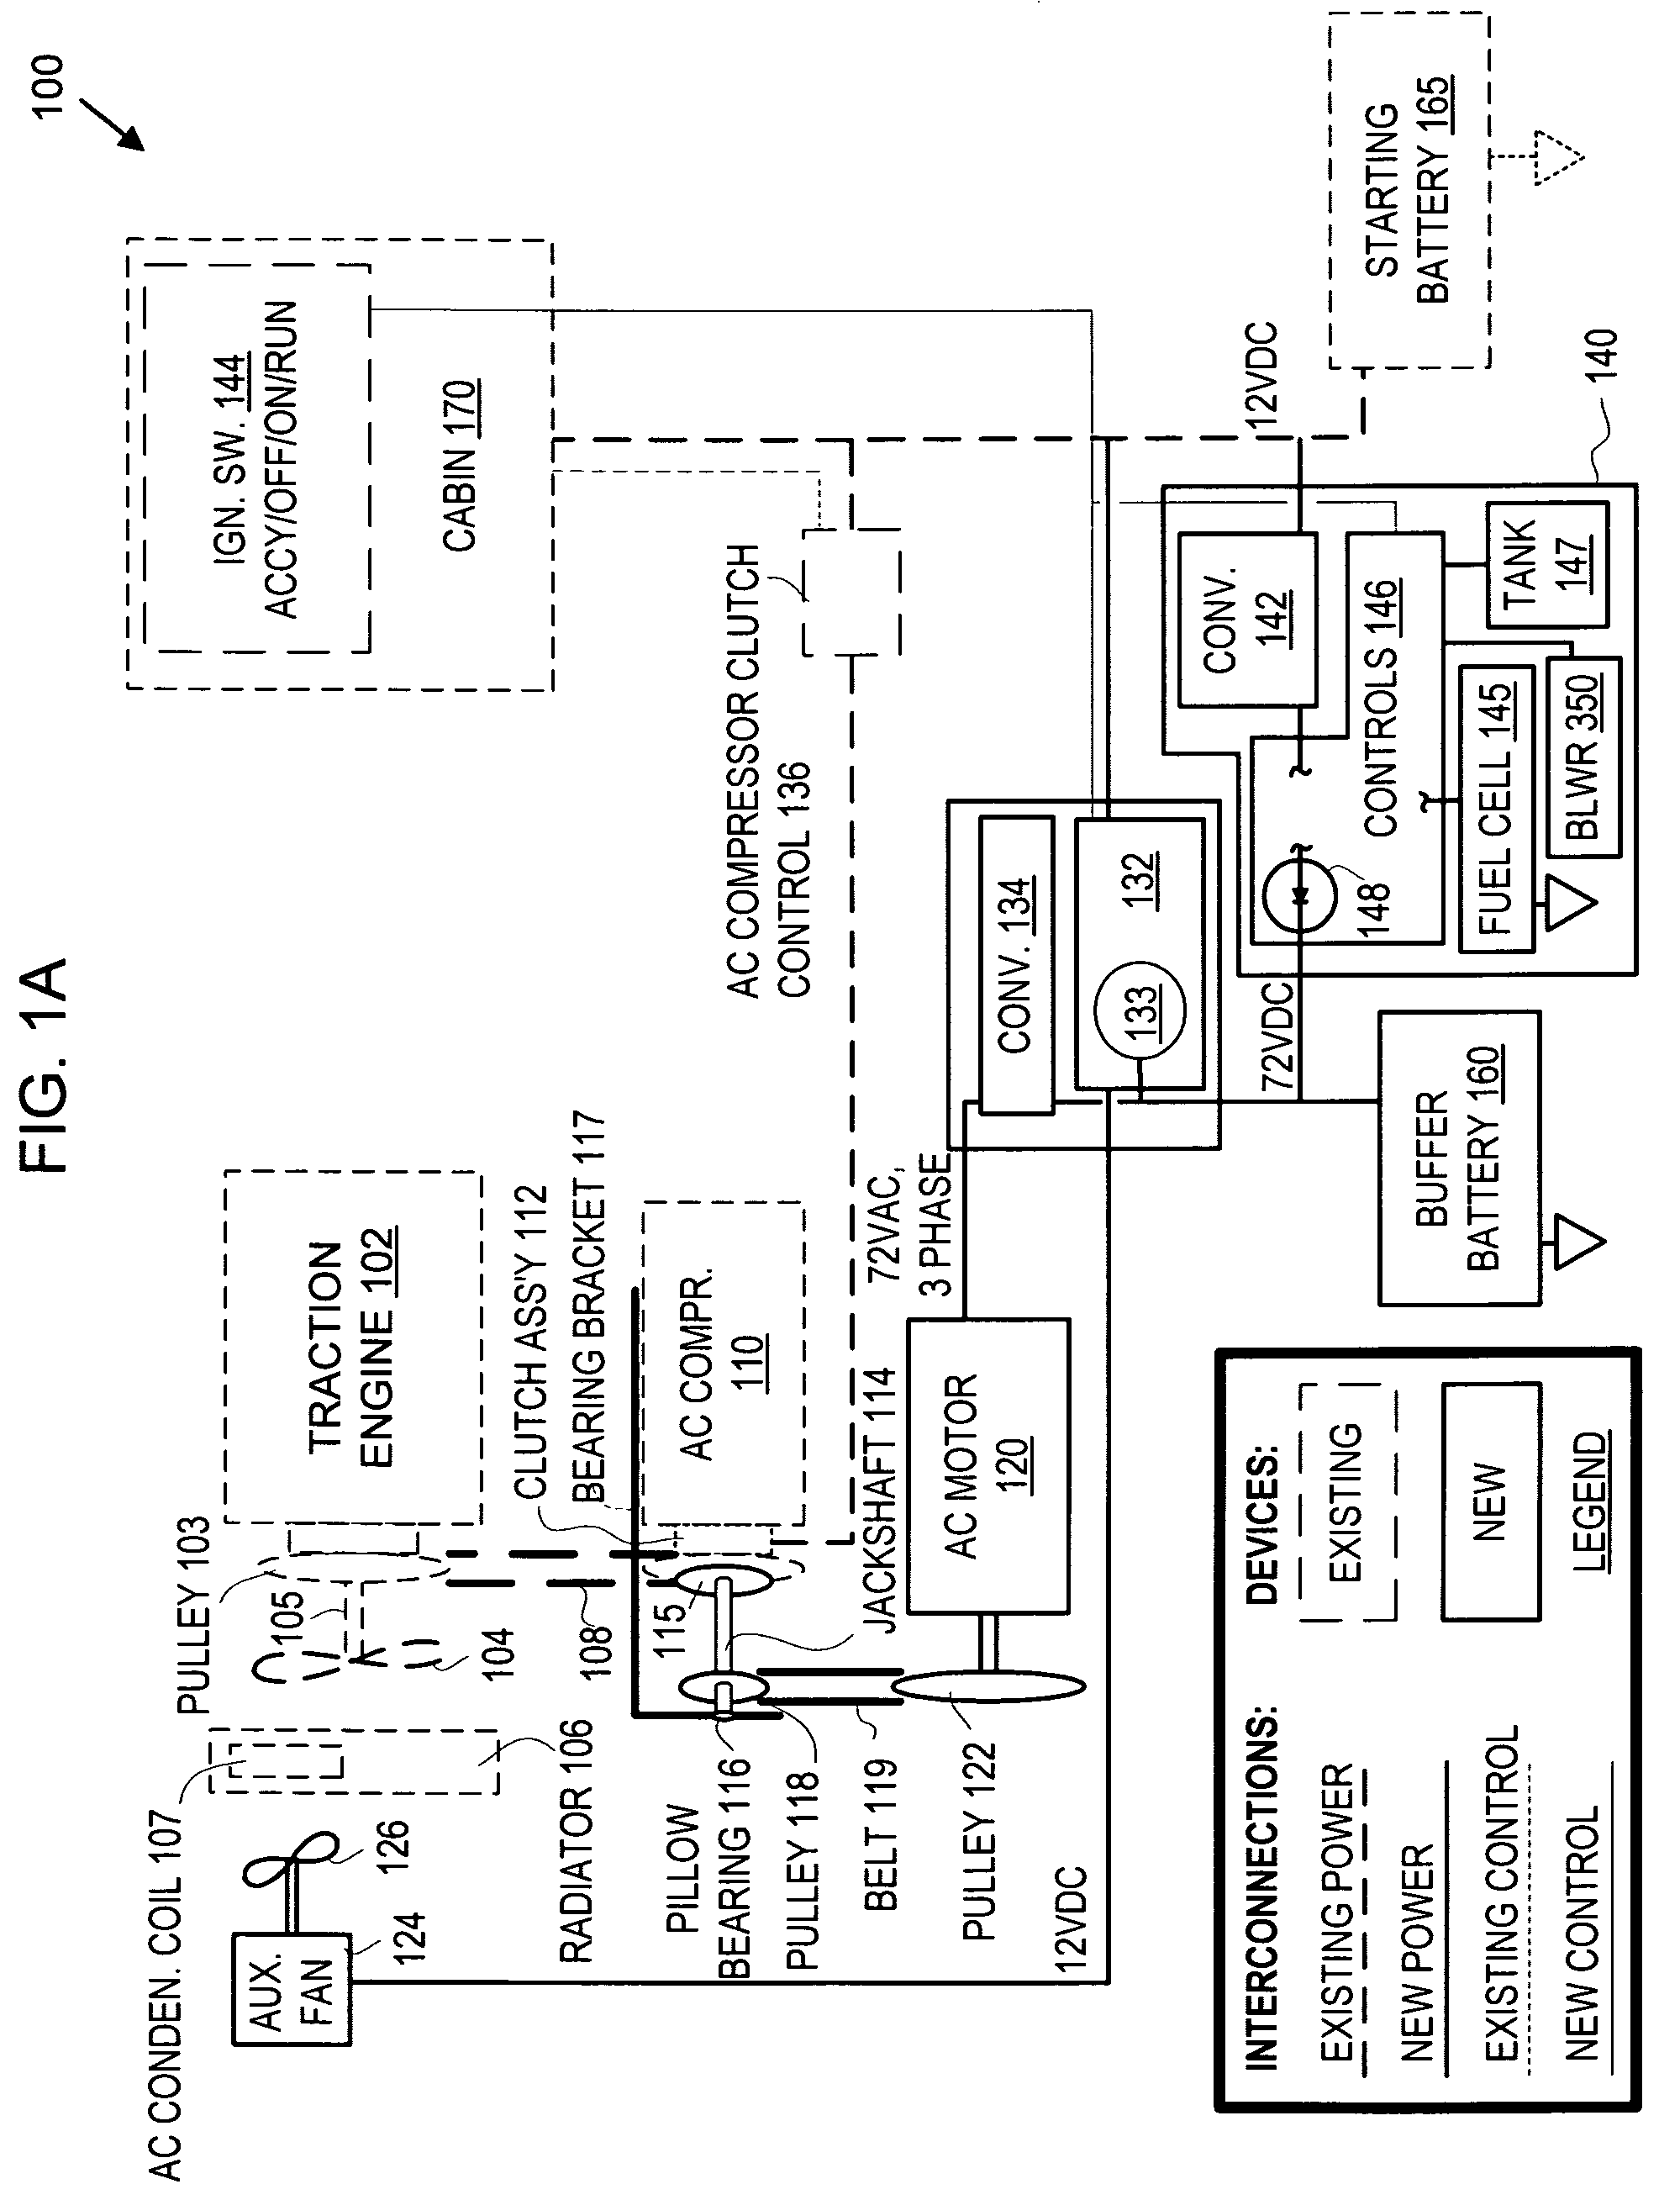 Method and auxiliary system for operating a comfort subsystem for a vehicle